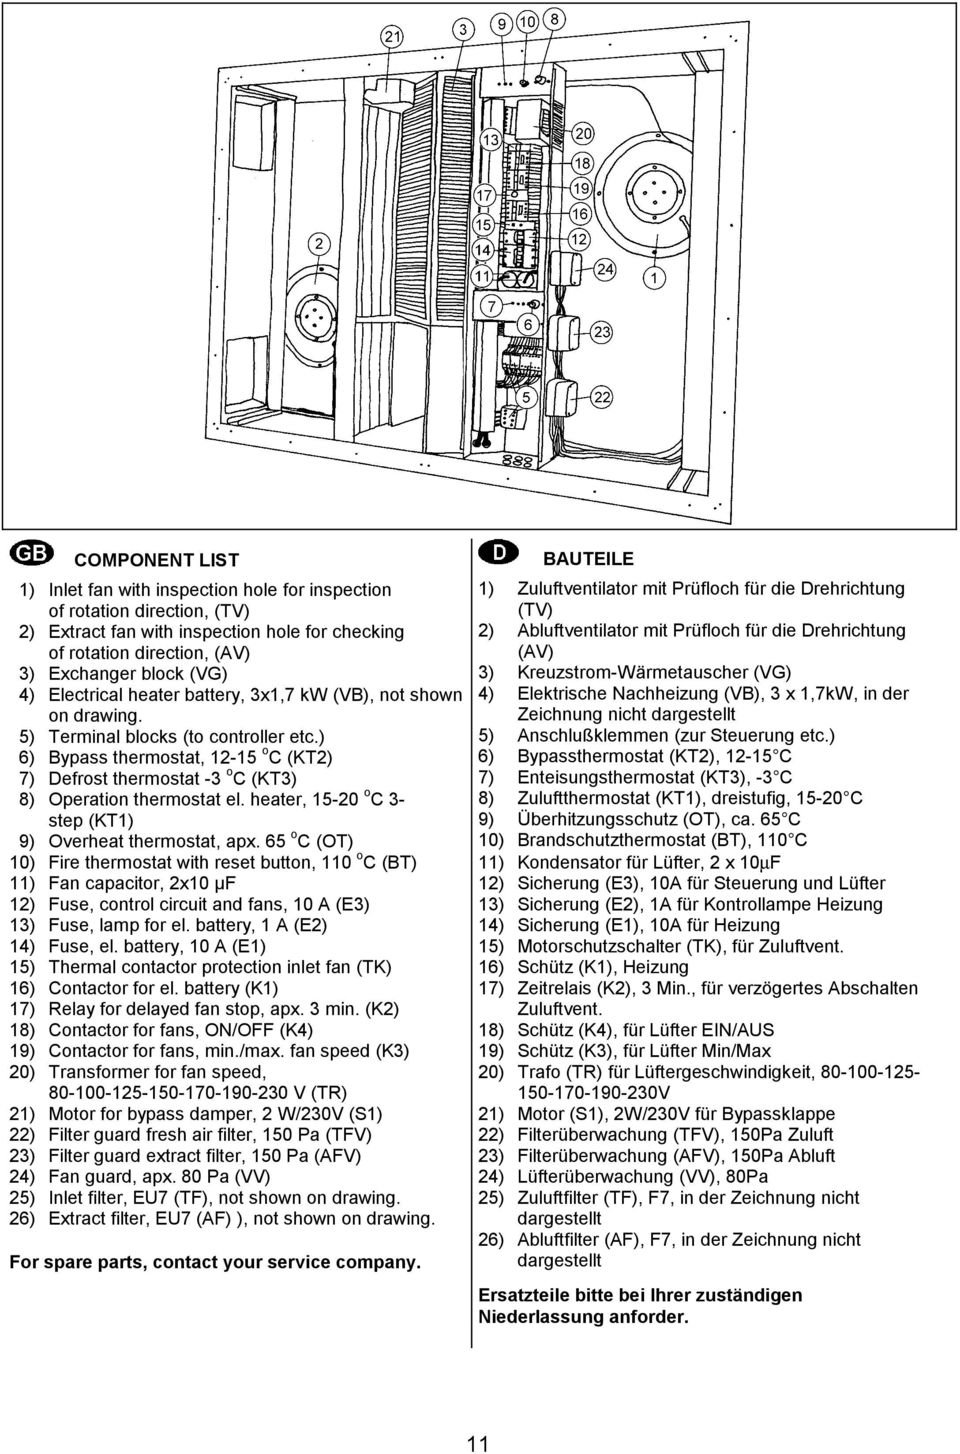 ) 6) Bypass thermostat, 12-15 o C (KT2) 7) Defrost thermostat -3 o C (KT3) 8) Operation thermostat el. heater, 15-20 o C 3- step (KT1) 9) Overheat thermostat, apx.